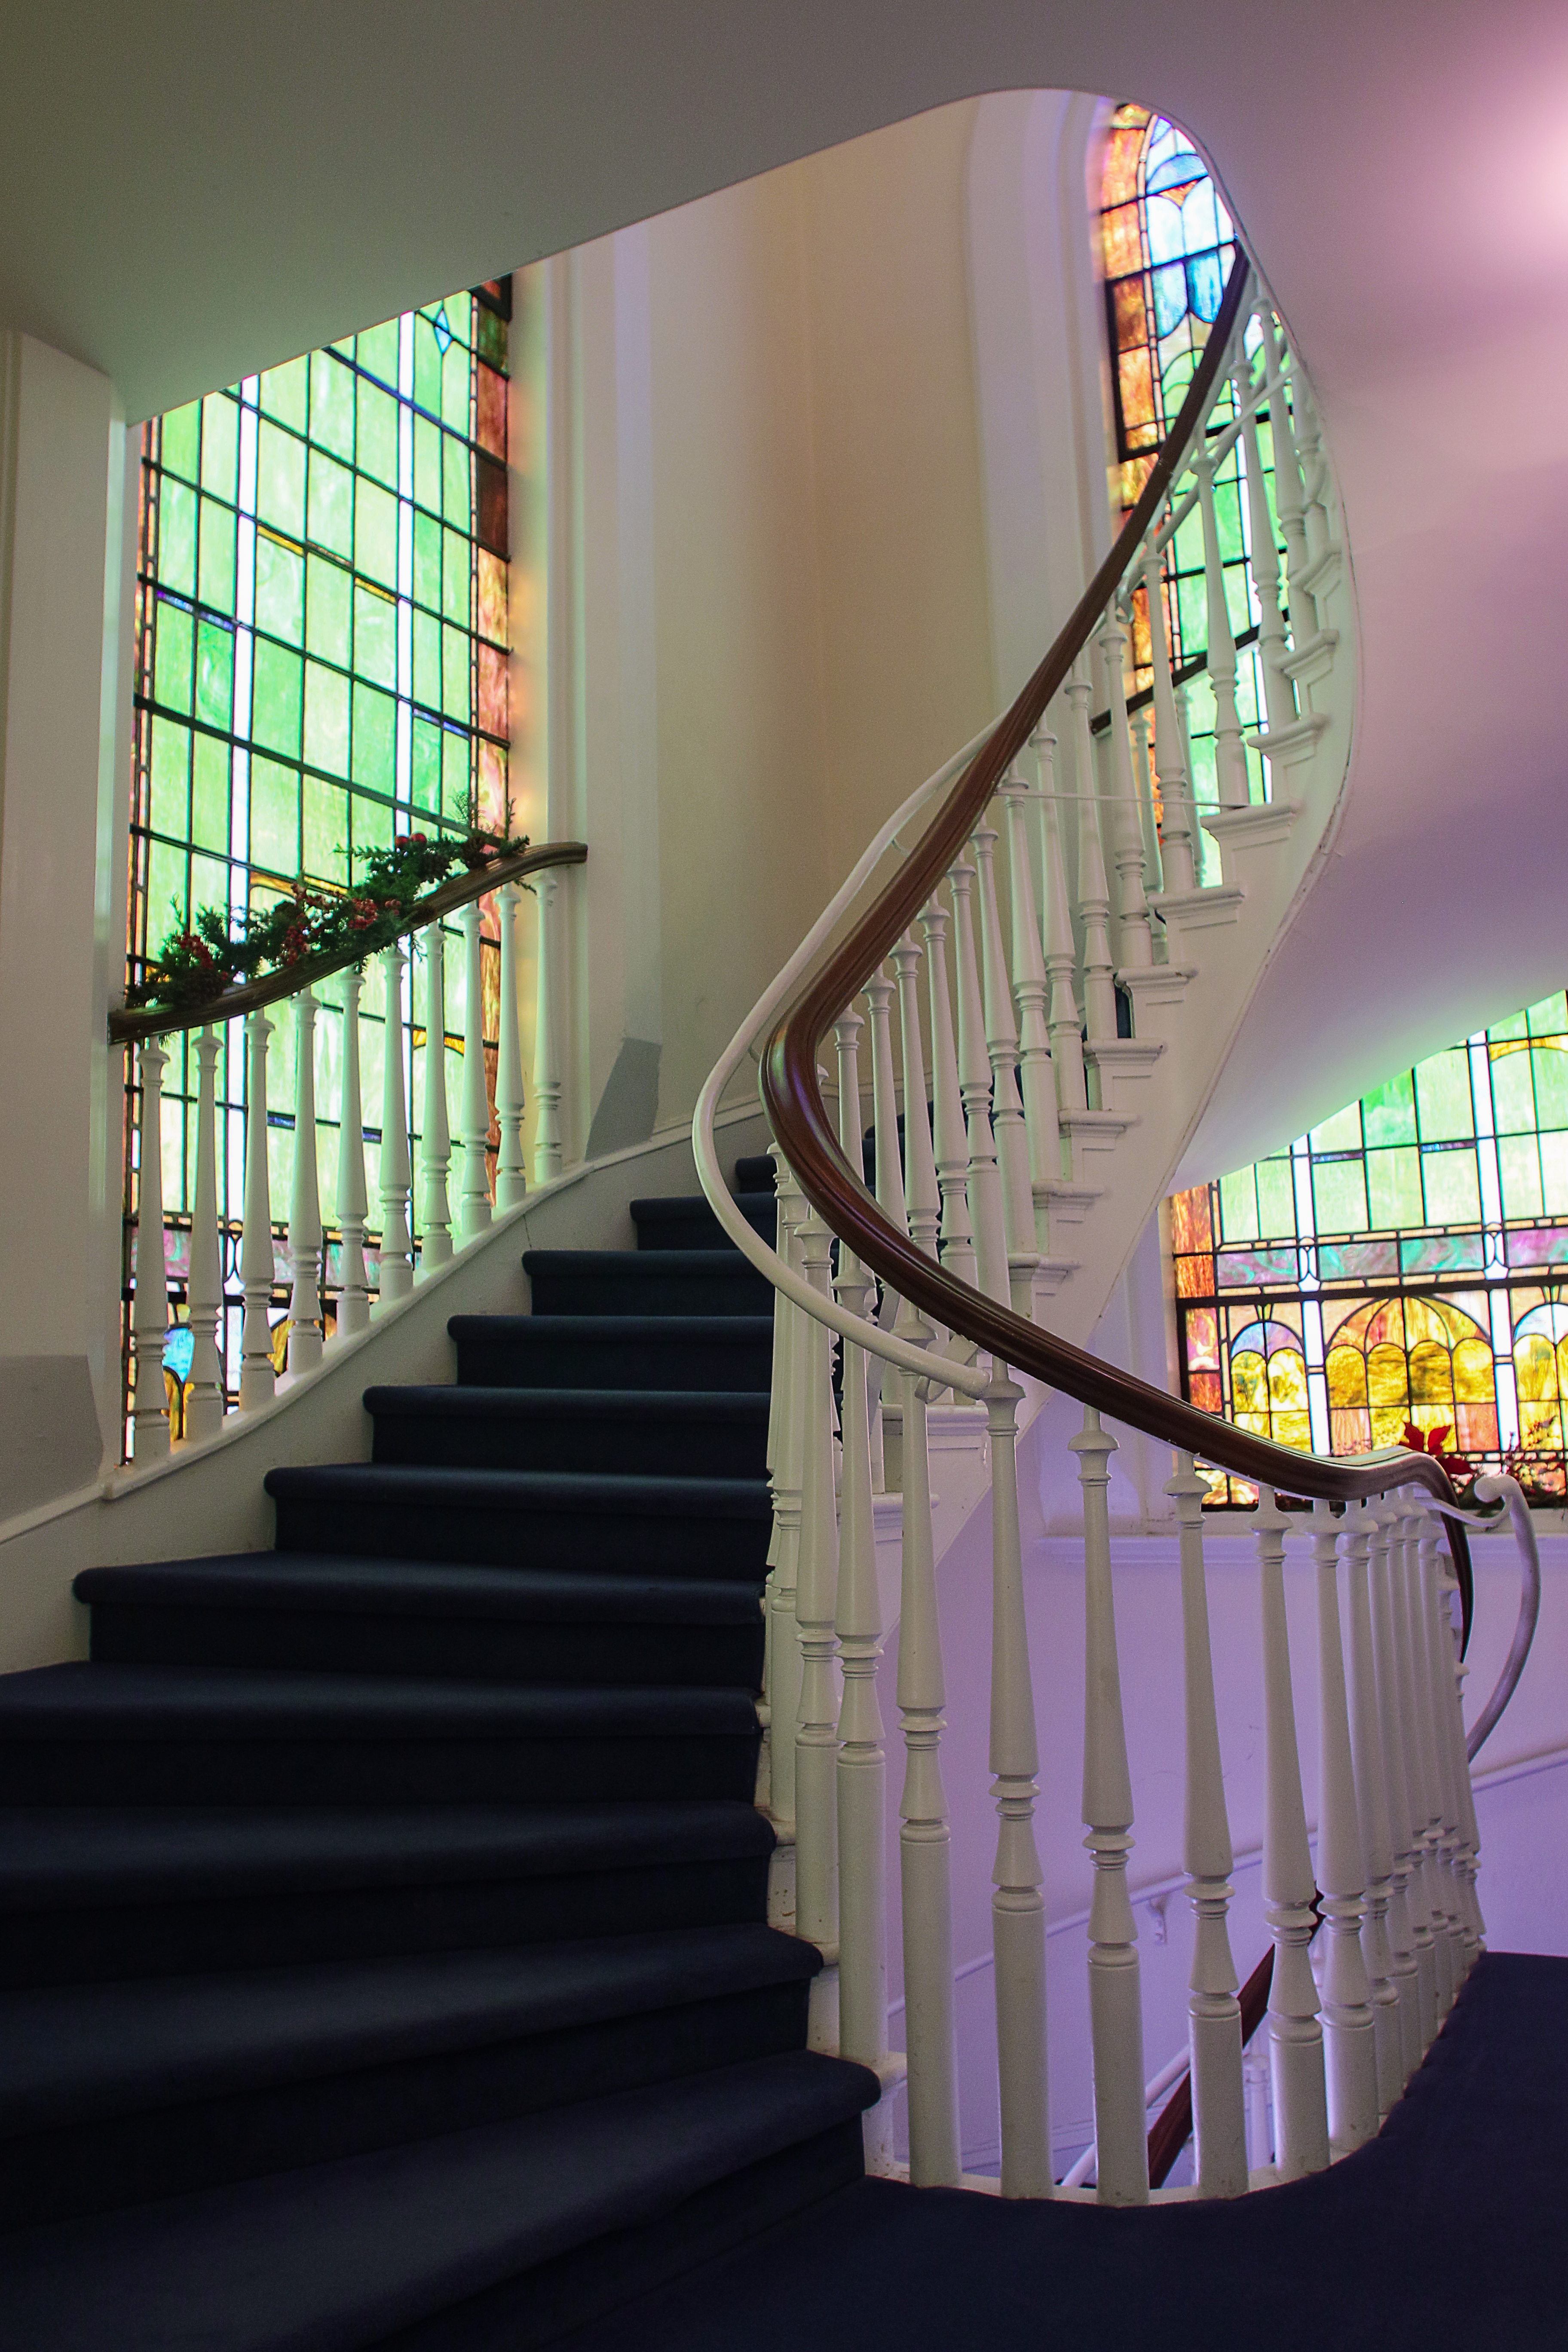 A staircase leading to the balcony overlooking the sanctuary of the First Presbyterian Church of Salem, a stop along the the 34th Annual Salem Yuletide Tour, Saturday, Dec. 4, 2021.